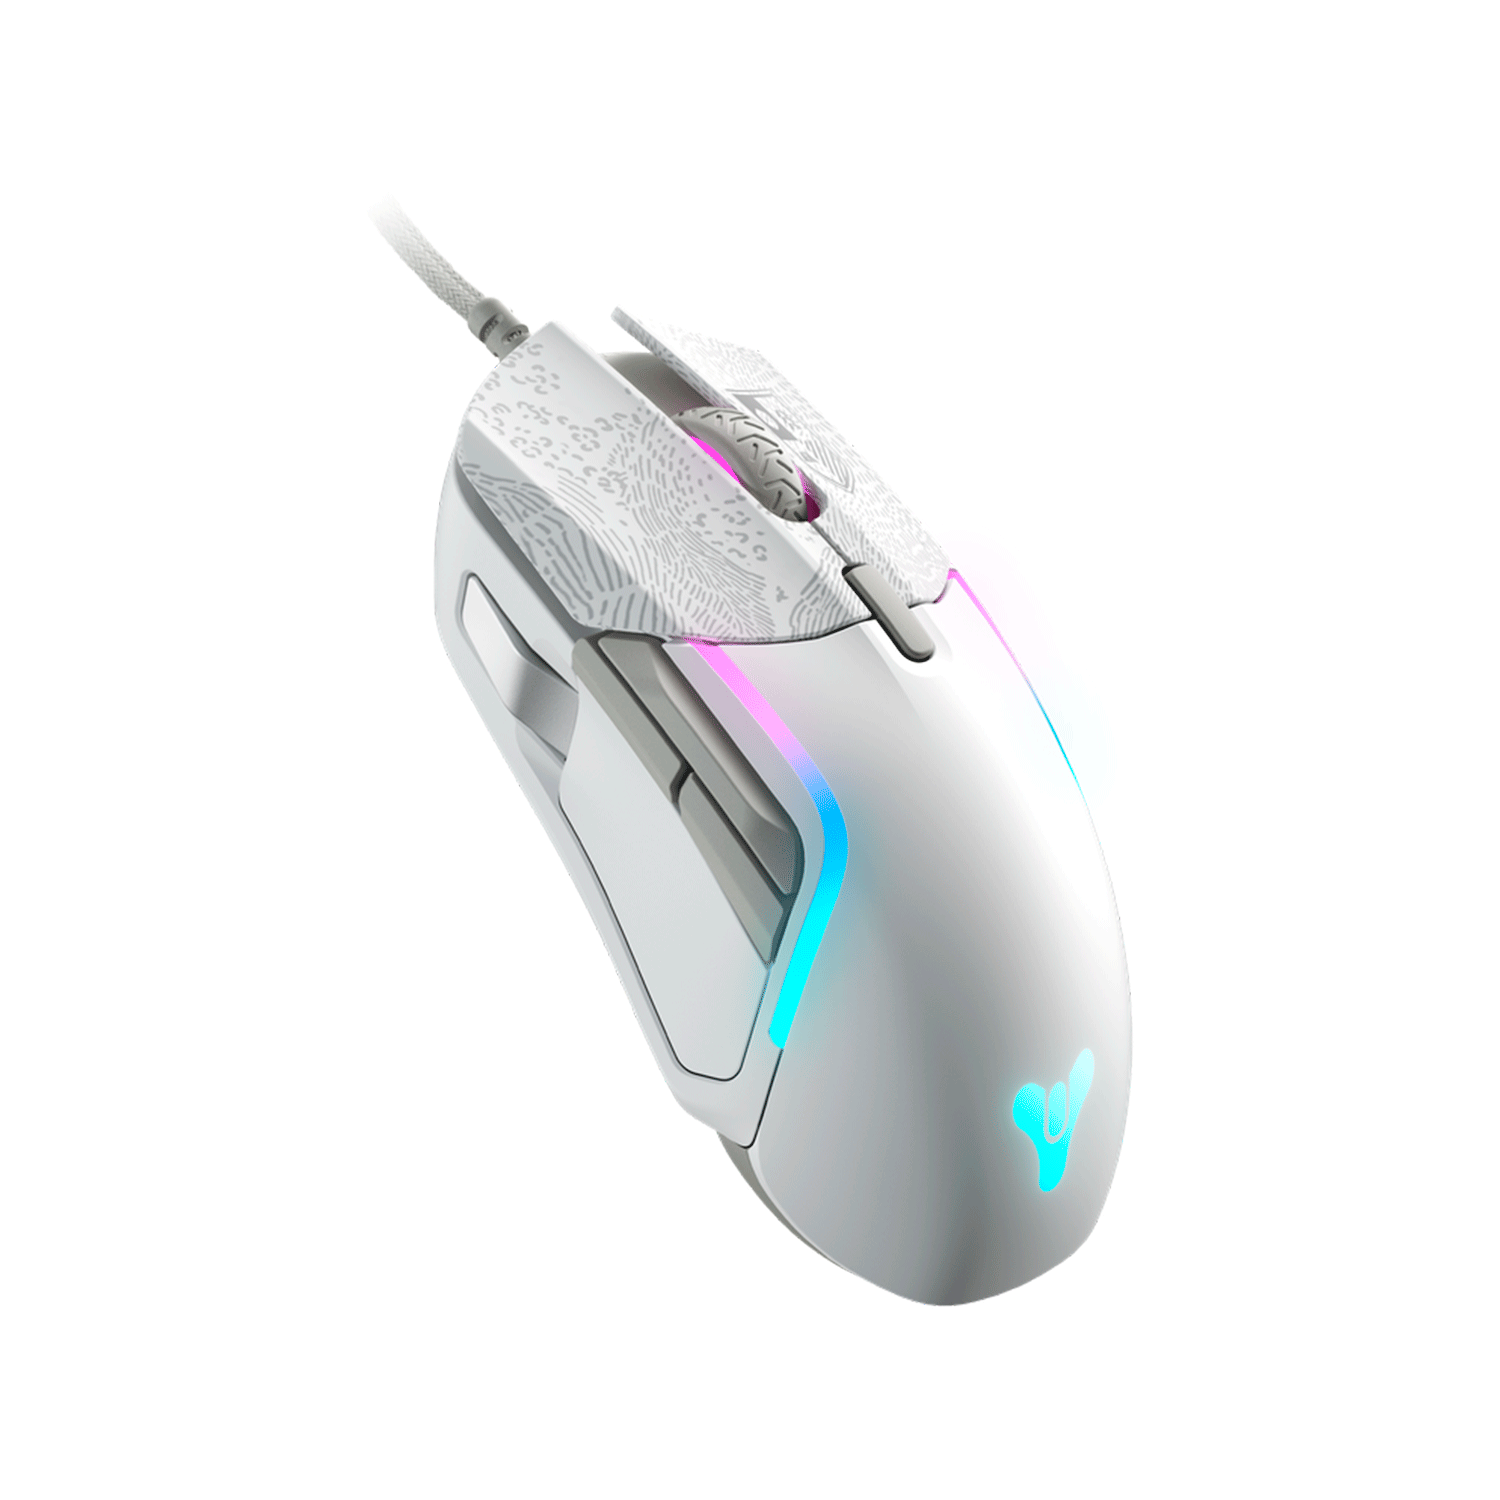 Mouse Steelseries Rival 5 Destiny Edition (62552)